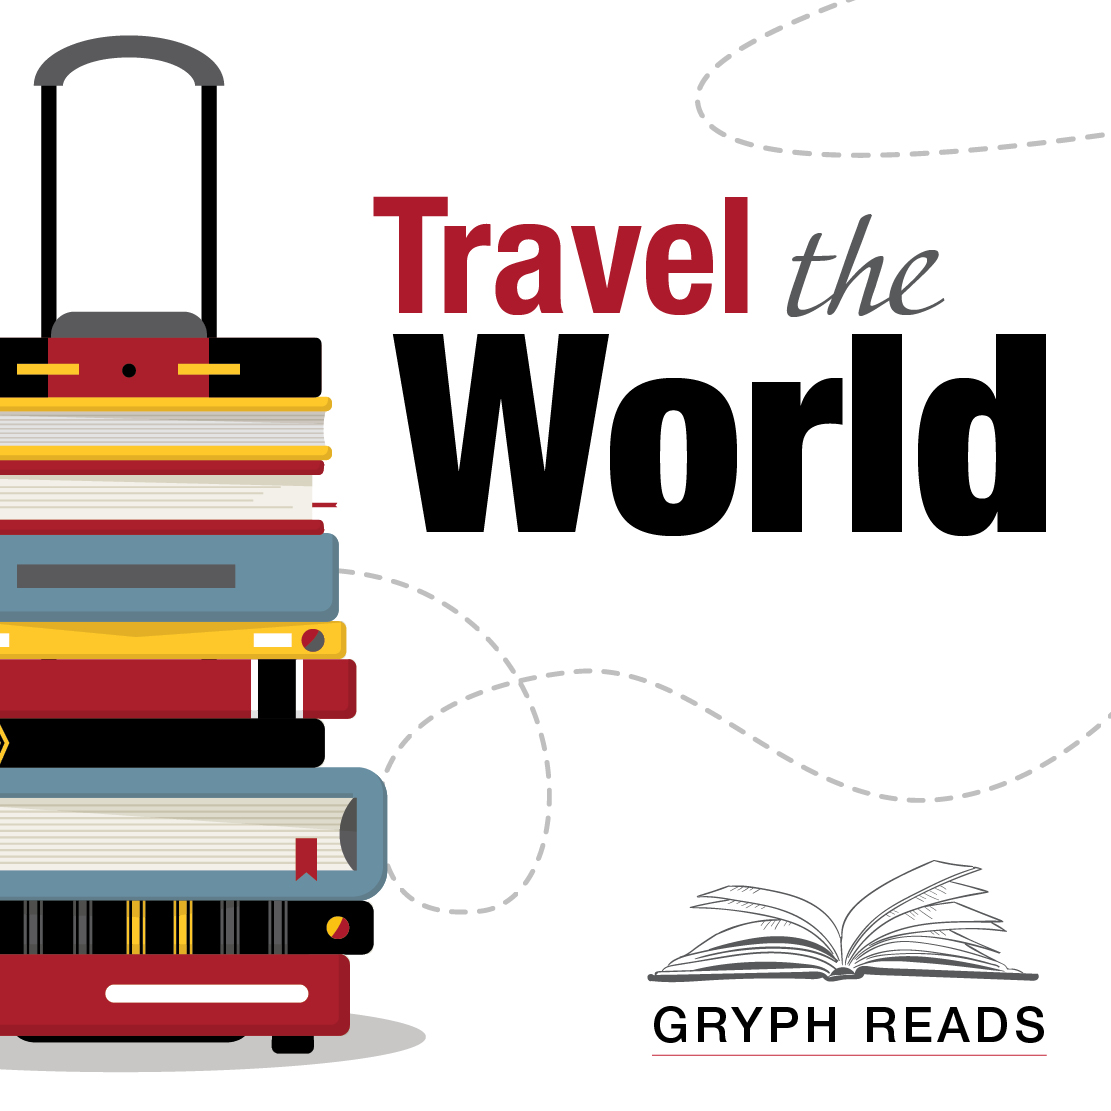 The left-side of this graphic is a suitcase made of red, yellow, blue, and black books. On the right of the graphic, the text says "Travel the World," with the Gryph Reads logo in the bottom righthand corner.